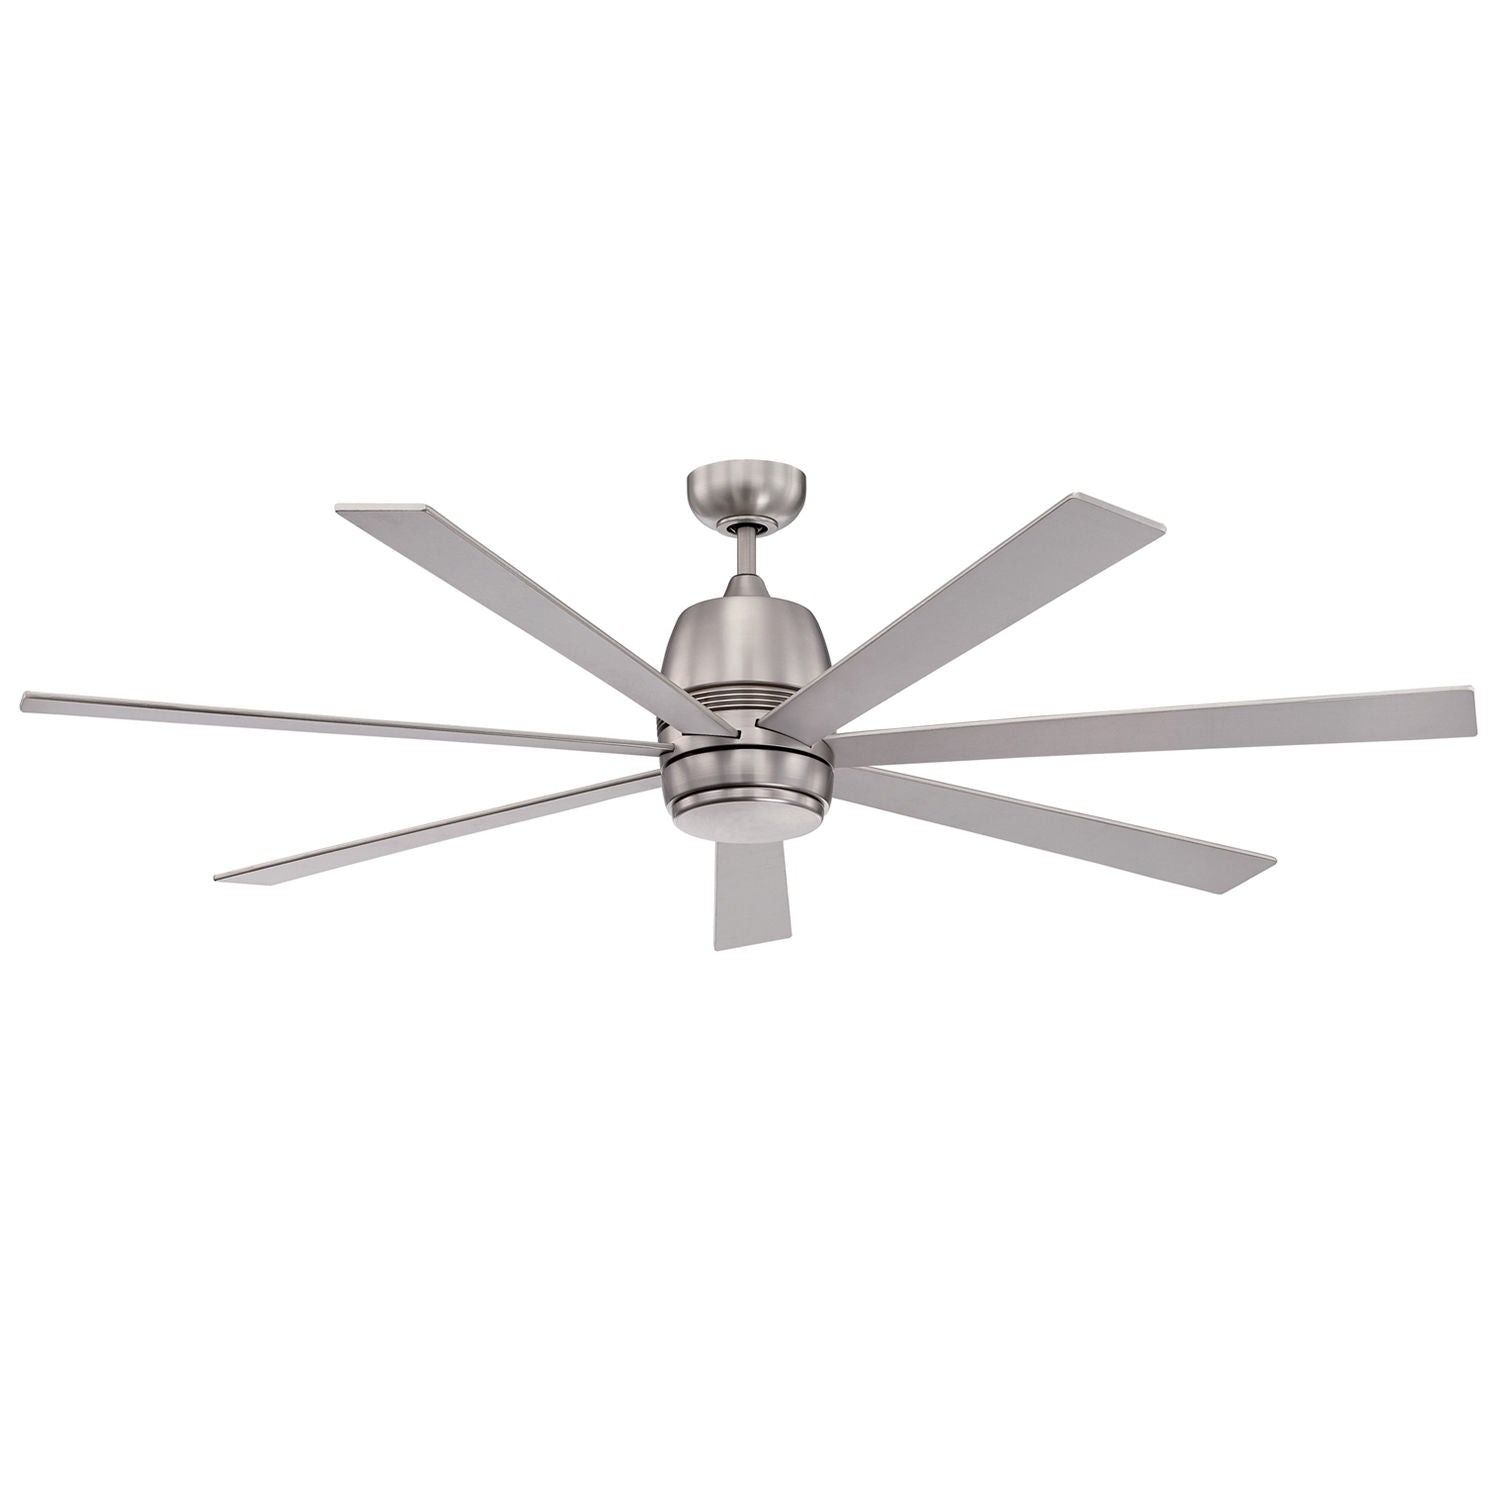 SIXTY-SEVEN Ceiling fan Stainless steel INTEGRATED LED - AC20760-SN | KENDAL